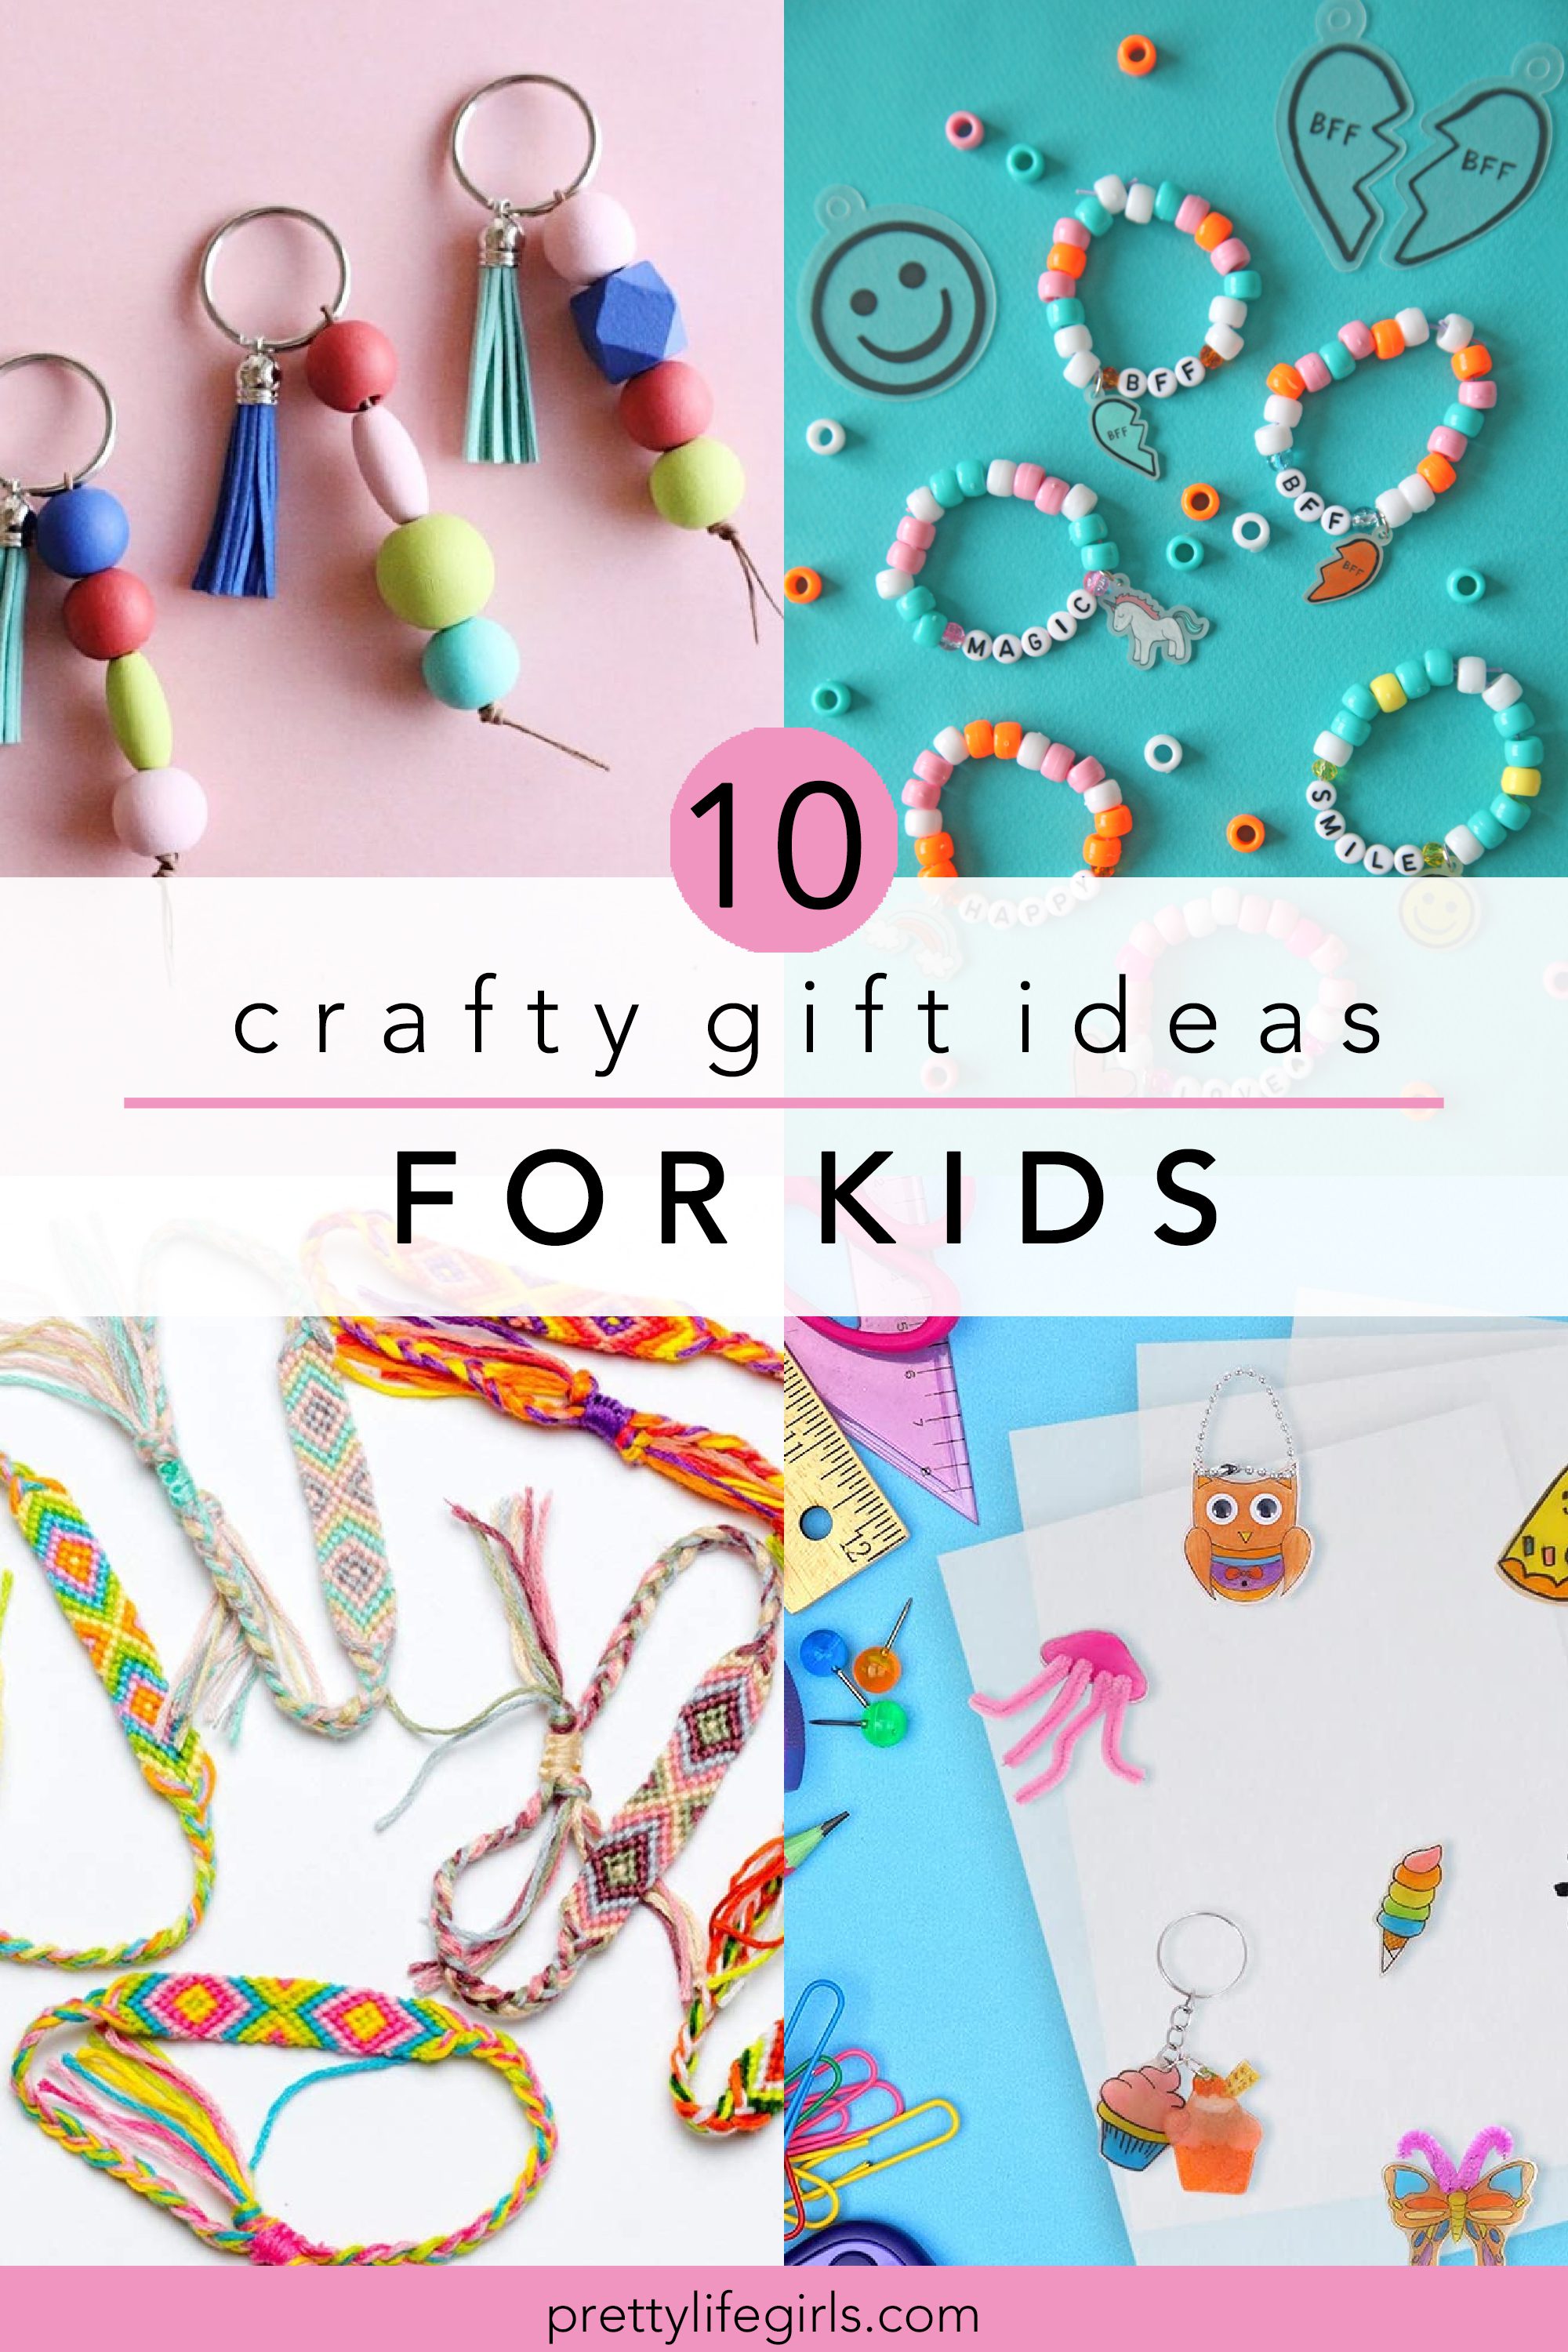 Holiday Shopping 2021: Top 10 Easy Christmas Craft Gift Ideas for Kids (they'll LOVE these!) + a tutorial featured by Top US Craft Blog + The Pretty Life Girls